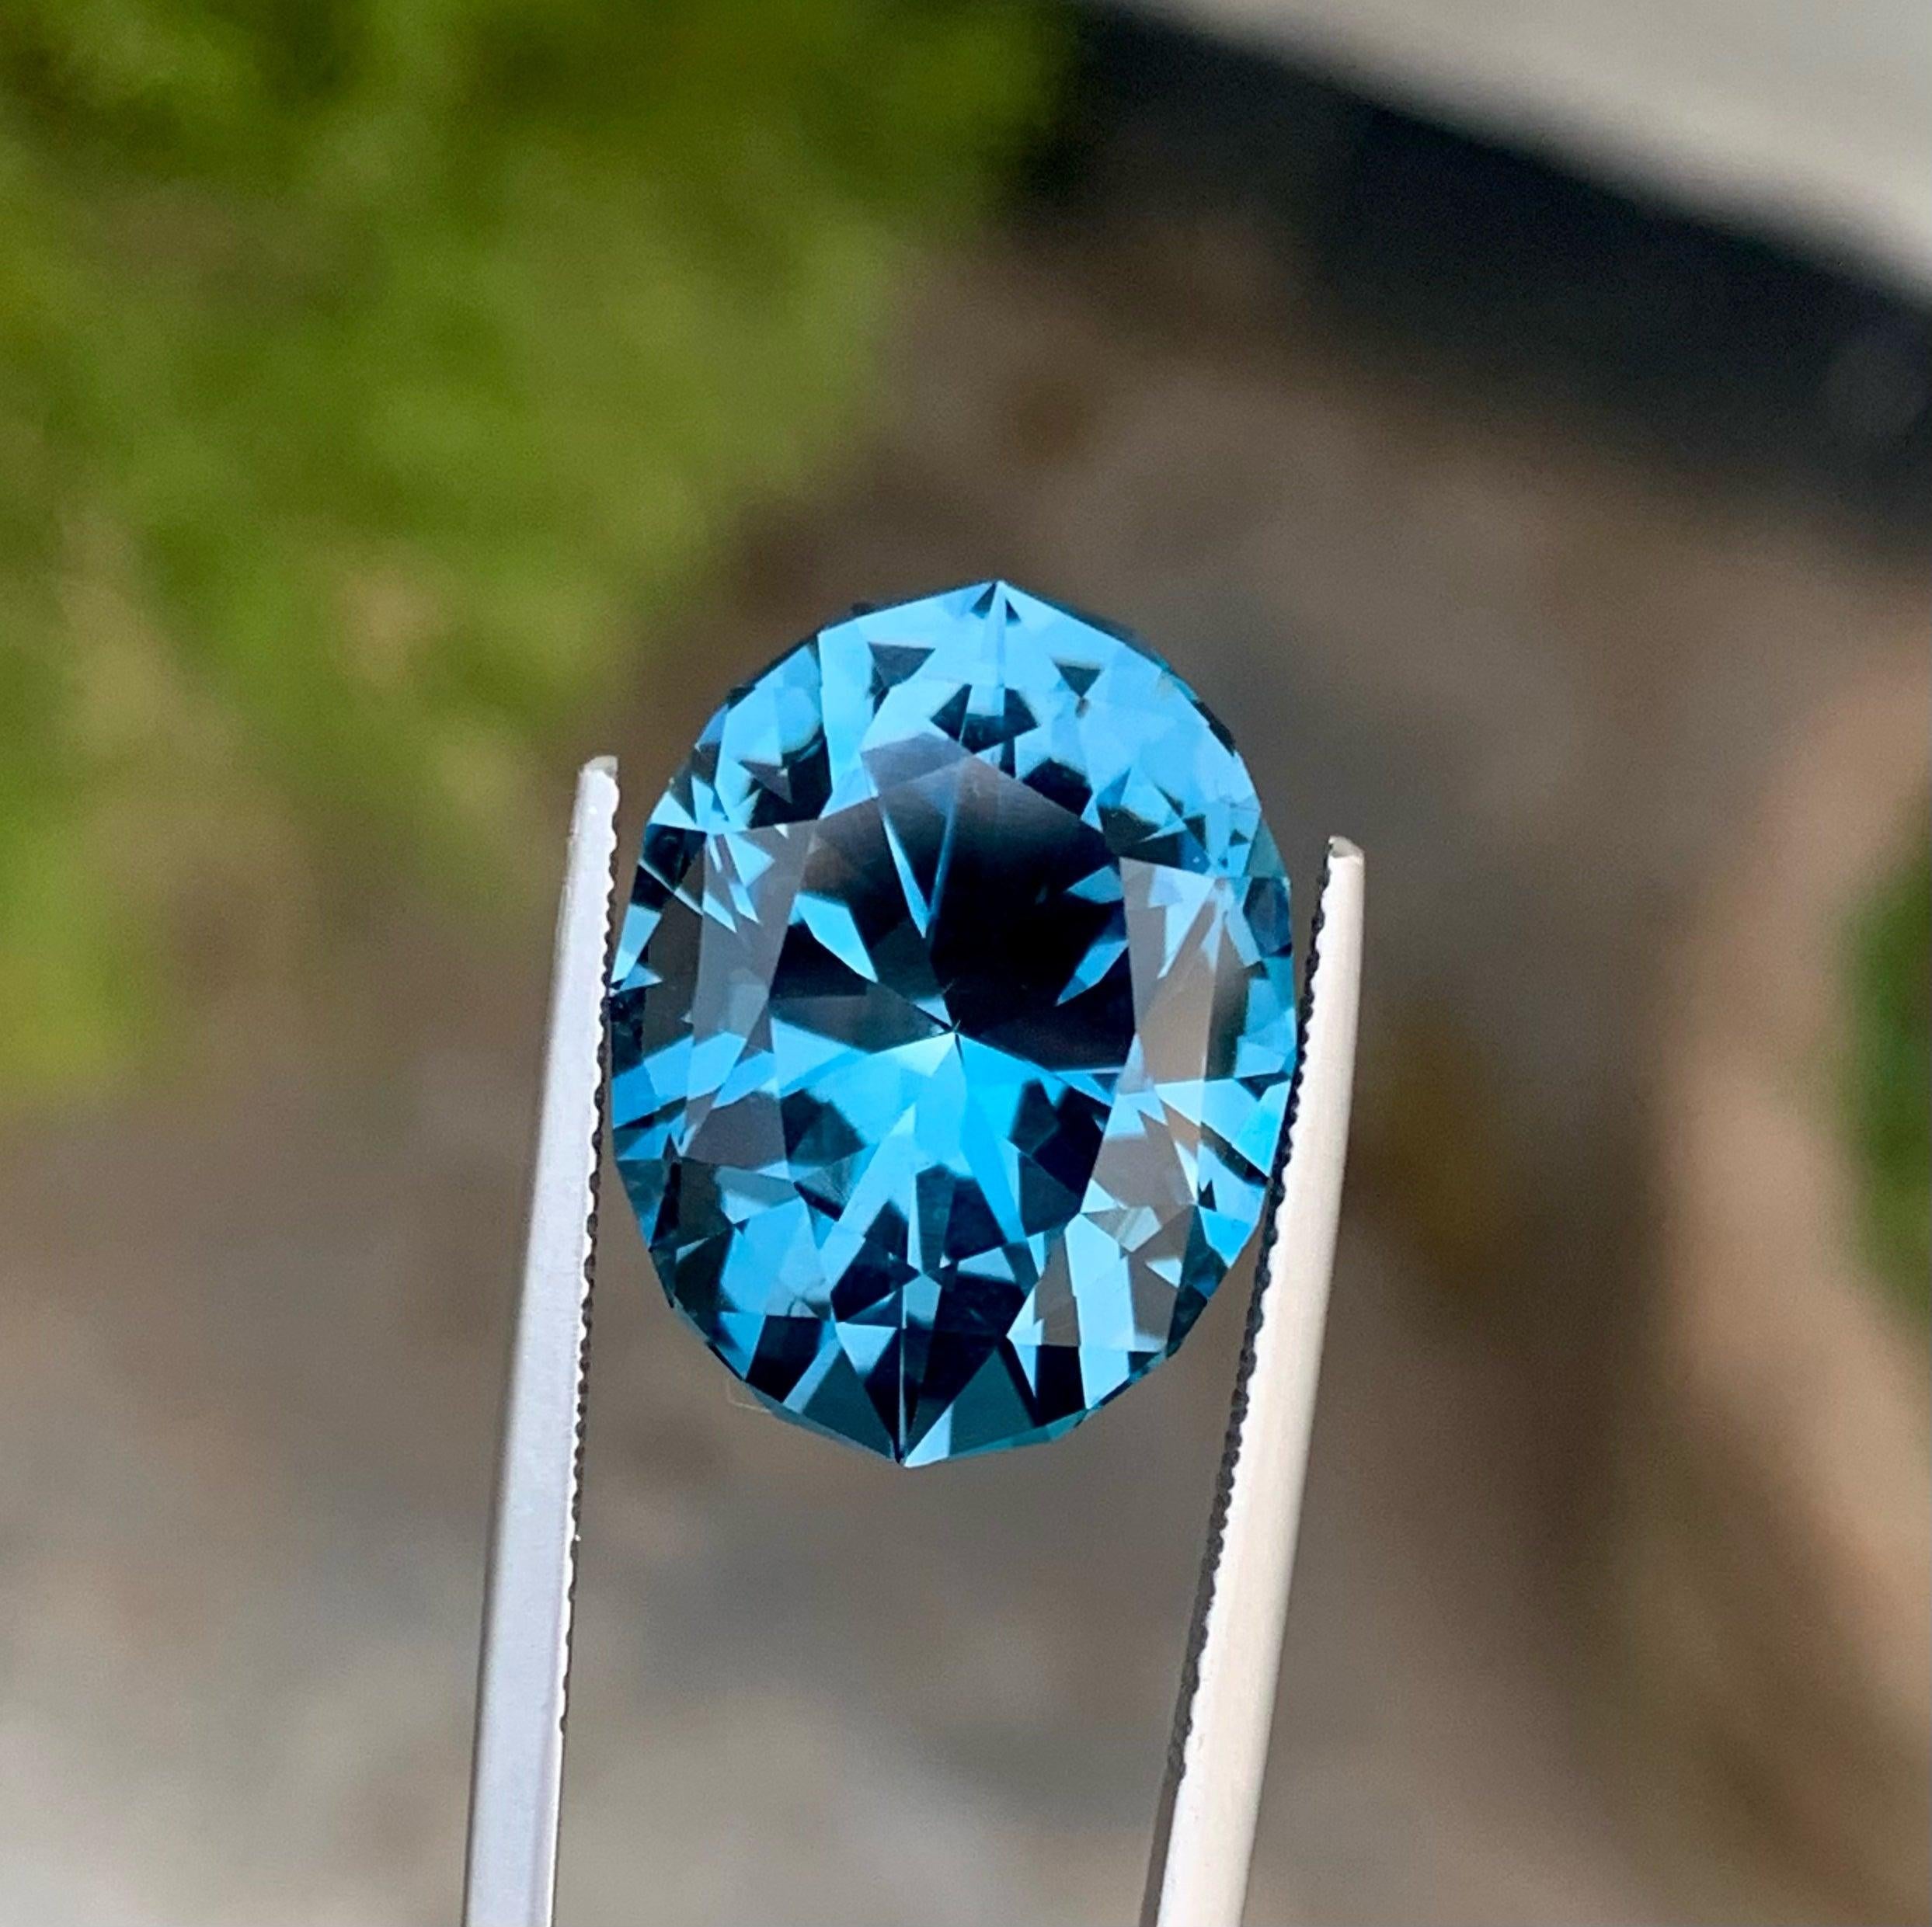 Fascinating Swiss Blue Topaz Stone, available For Sale At Wholesale Price Natural High Quality 17.85 Carats Loupe Clean Clarity Heated Topaz From Madagascar. 
Product Information:
GEMSTONE NAME: Fascinating Swiss Blue Topaz Stone
WEIGHT: 17.85